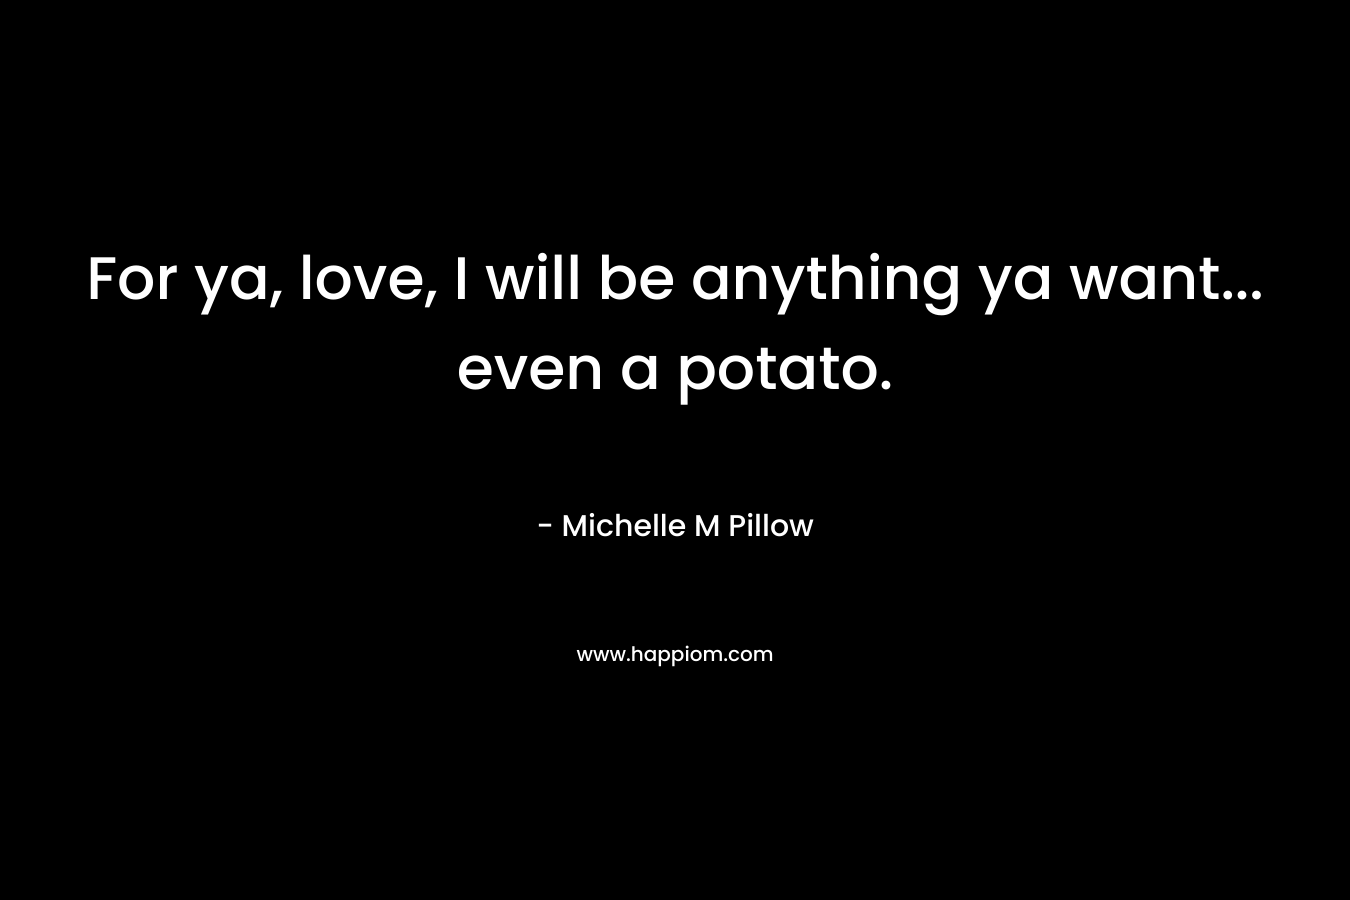 For ya, love, I will be anything ya want... even a potato.